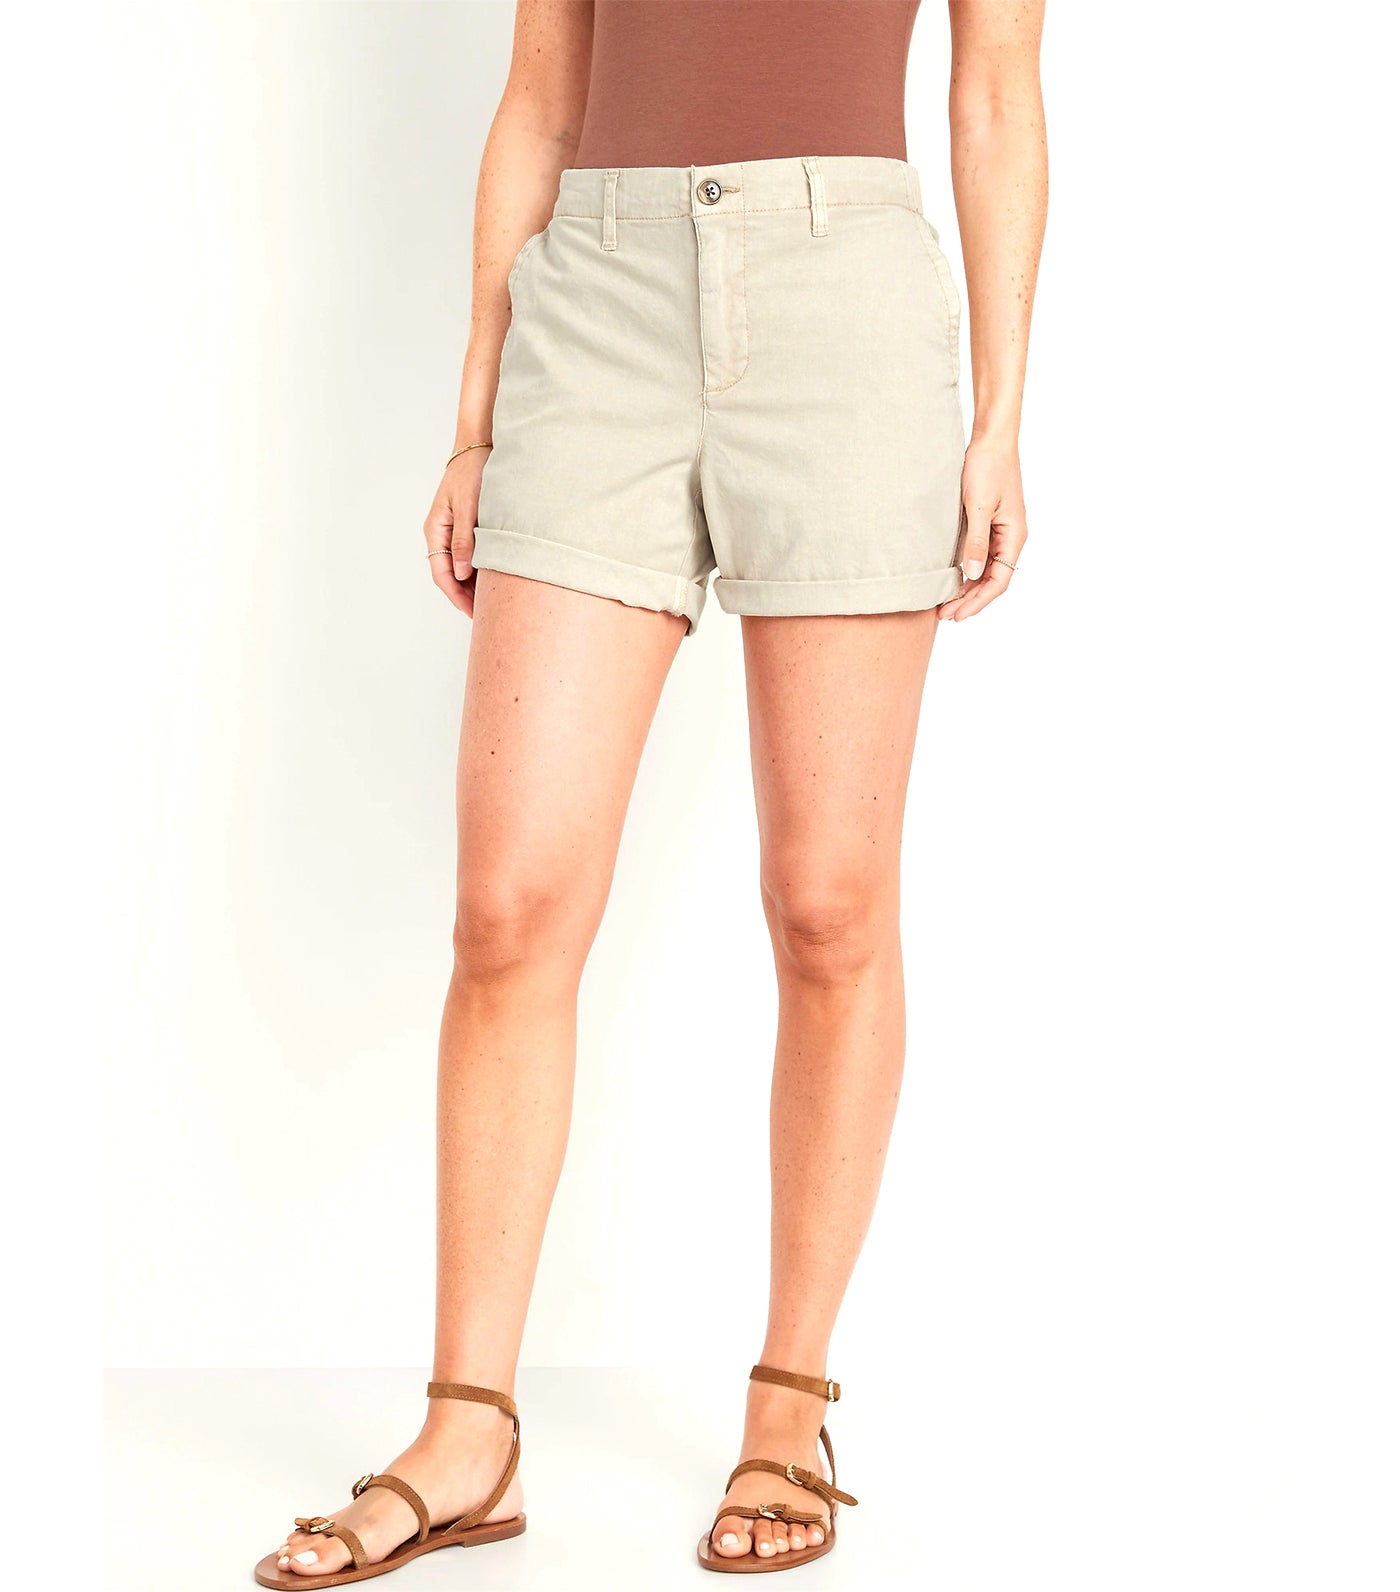 High-Waisted OGC Chino Shorts for Women - 5-inch inseam A Stones Throw